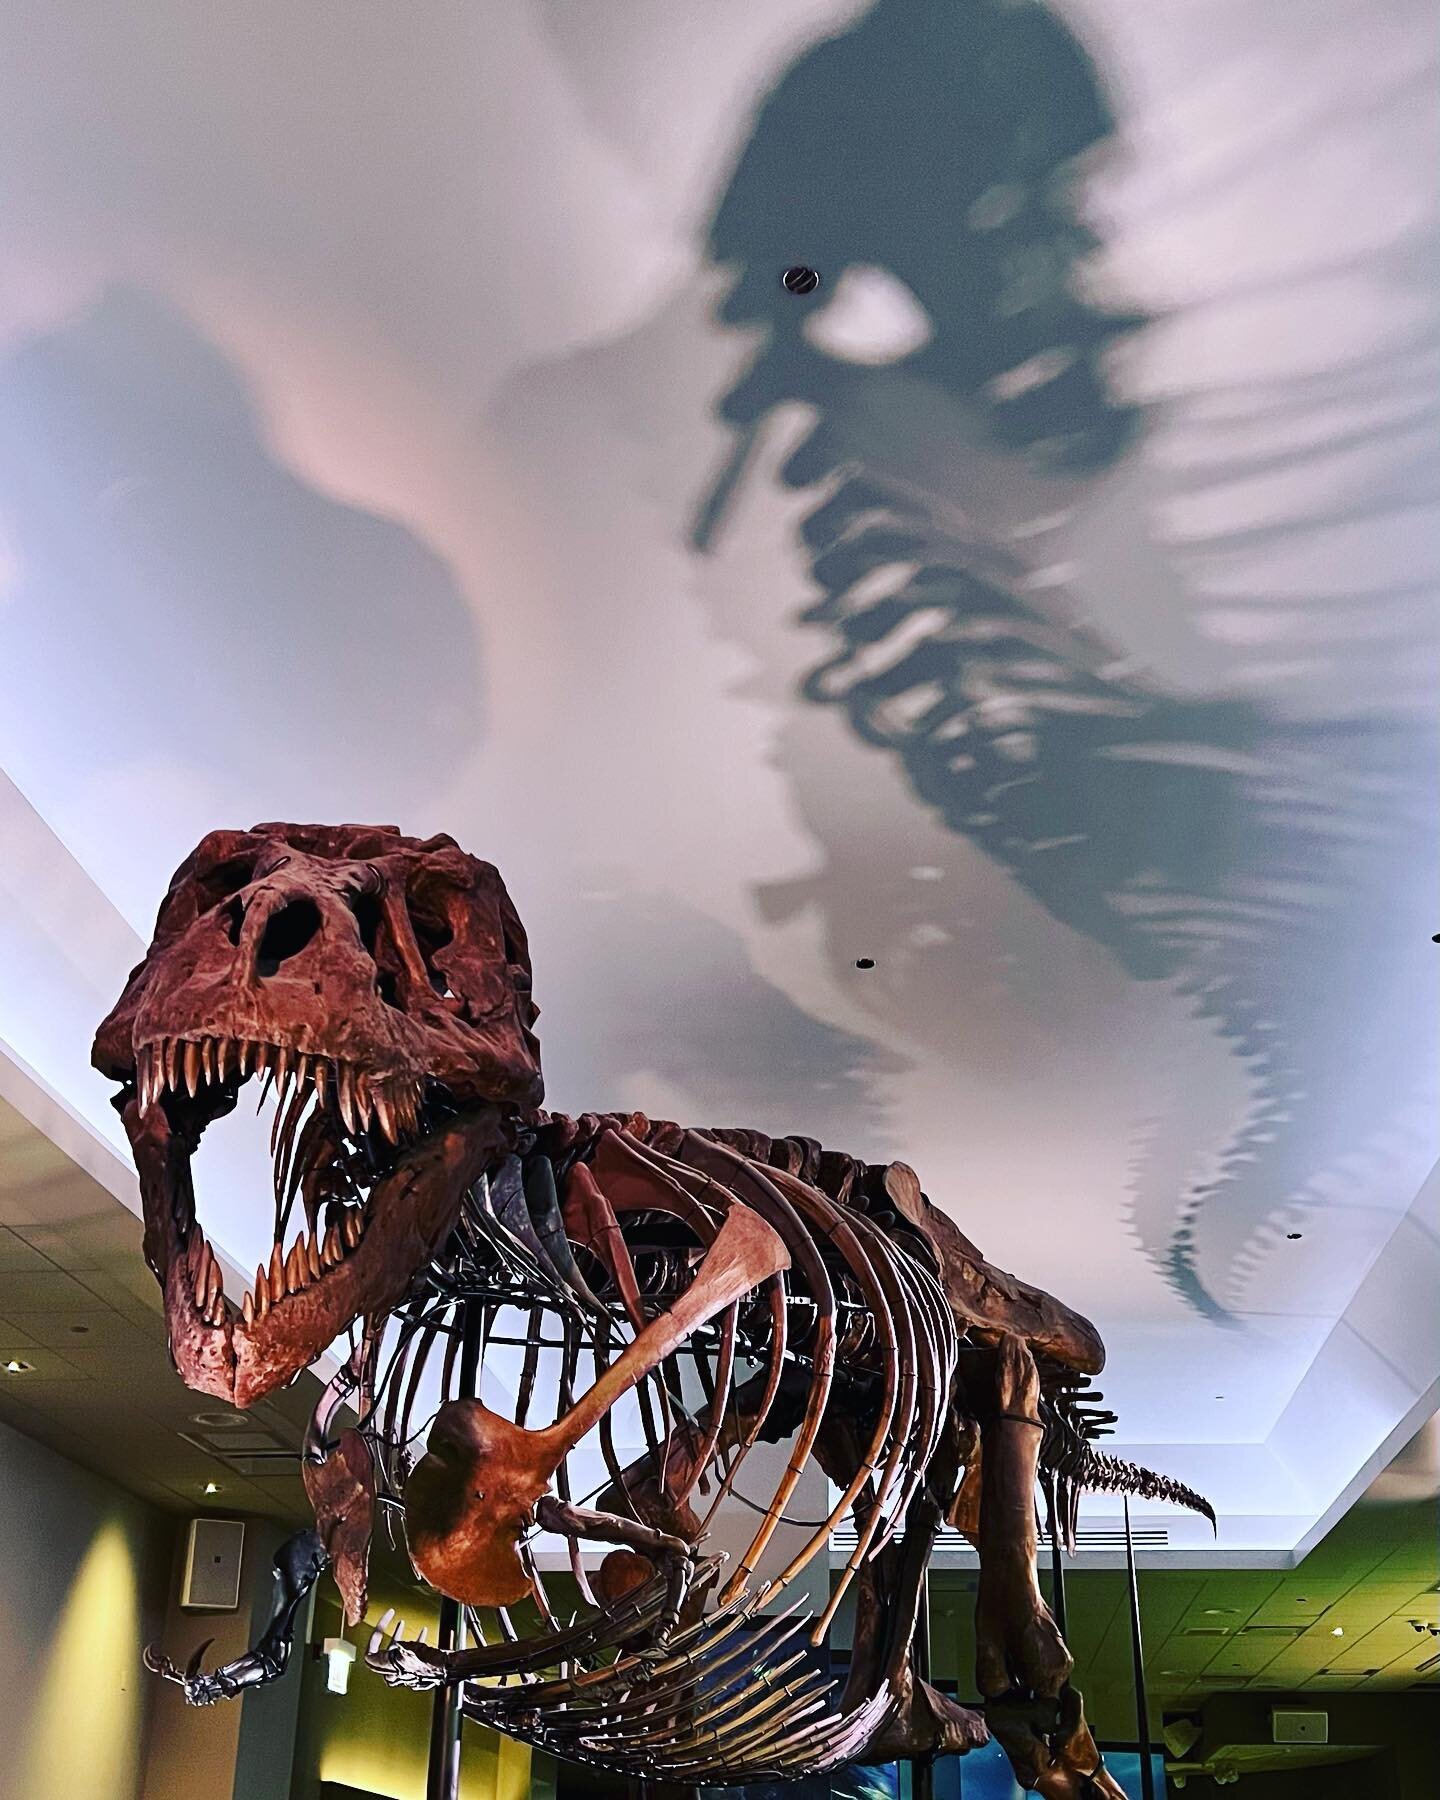 You can&rsquo;t go to the @fieldmuseum and not visit #SUEtheTrex! It was my first time seeing her in her new digs, and the lighting definitely added to the atmosphere. But as is often the case, my photographer&rsquo;s eye was drawn to the building&rs